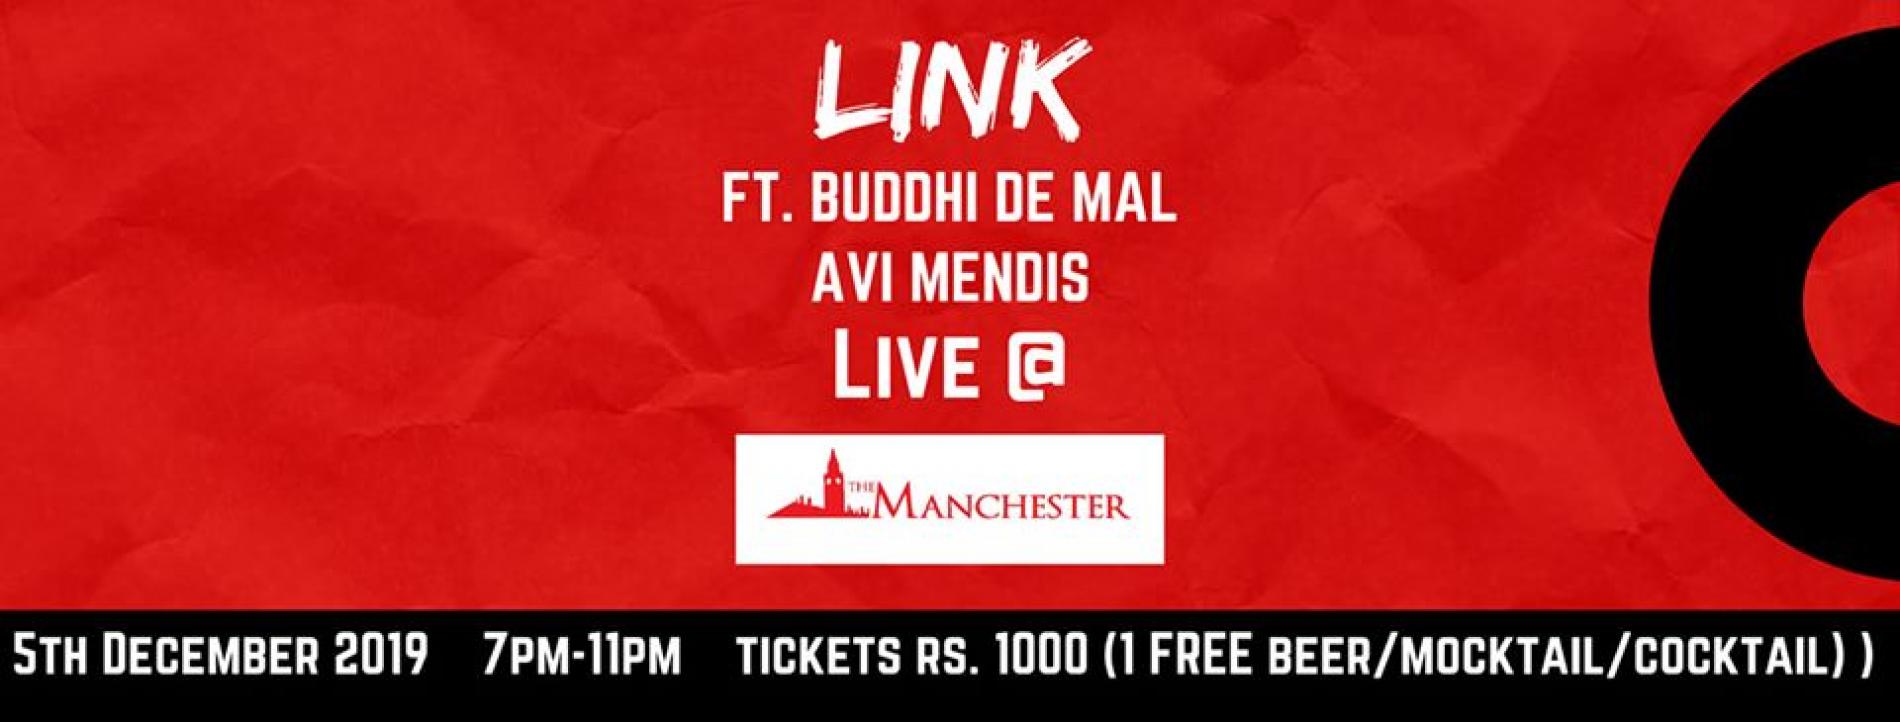 LINK Live At The Manchester